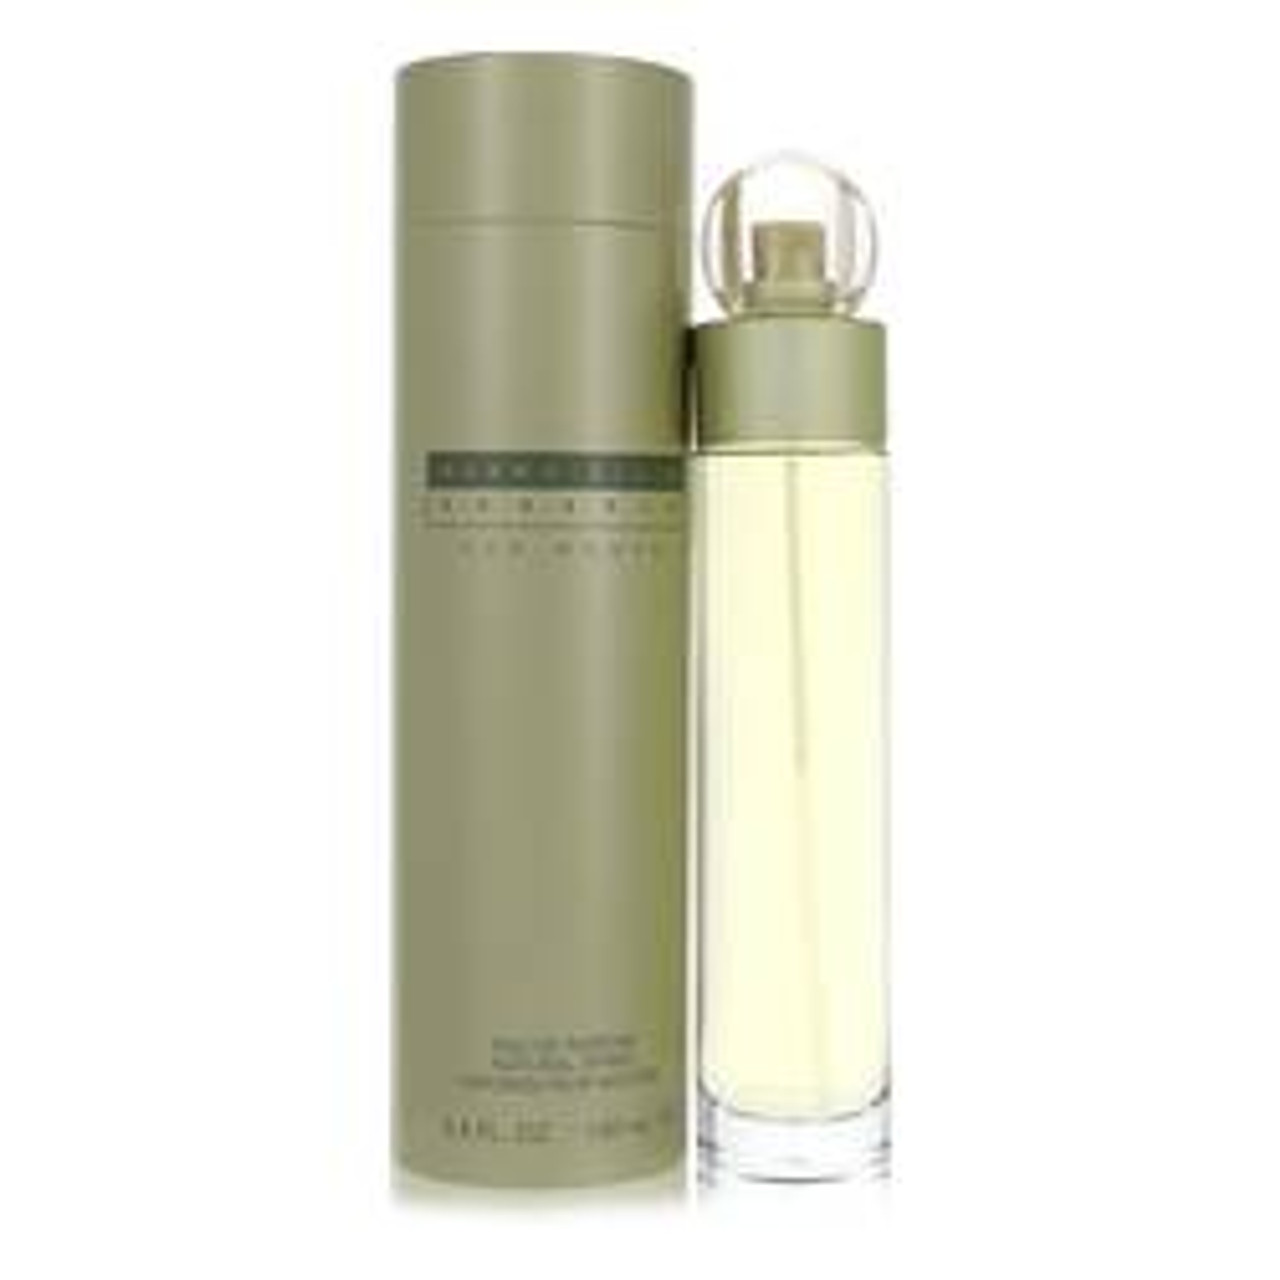 Perry Ellis Reserve Perfume By Perry Ellis Eau De Parfum Spray 3.4 oz for Women - [From 83.00 - Choose pk Qty ] - *Ships from Miami